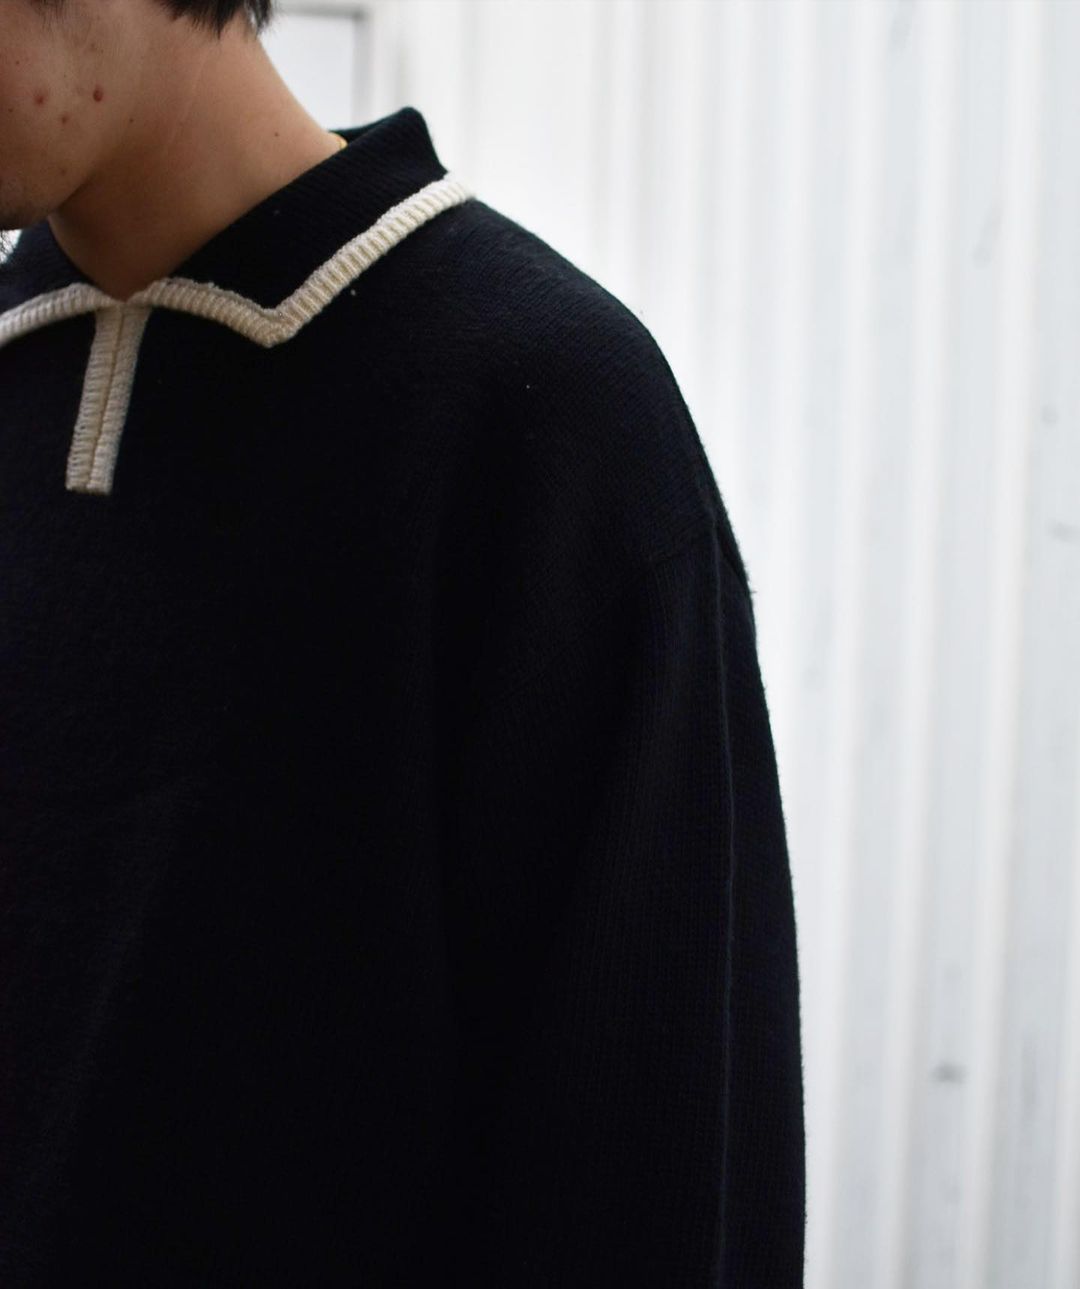 SON OF THE CHEESE / Line Polo Knit